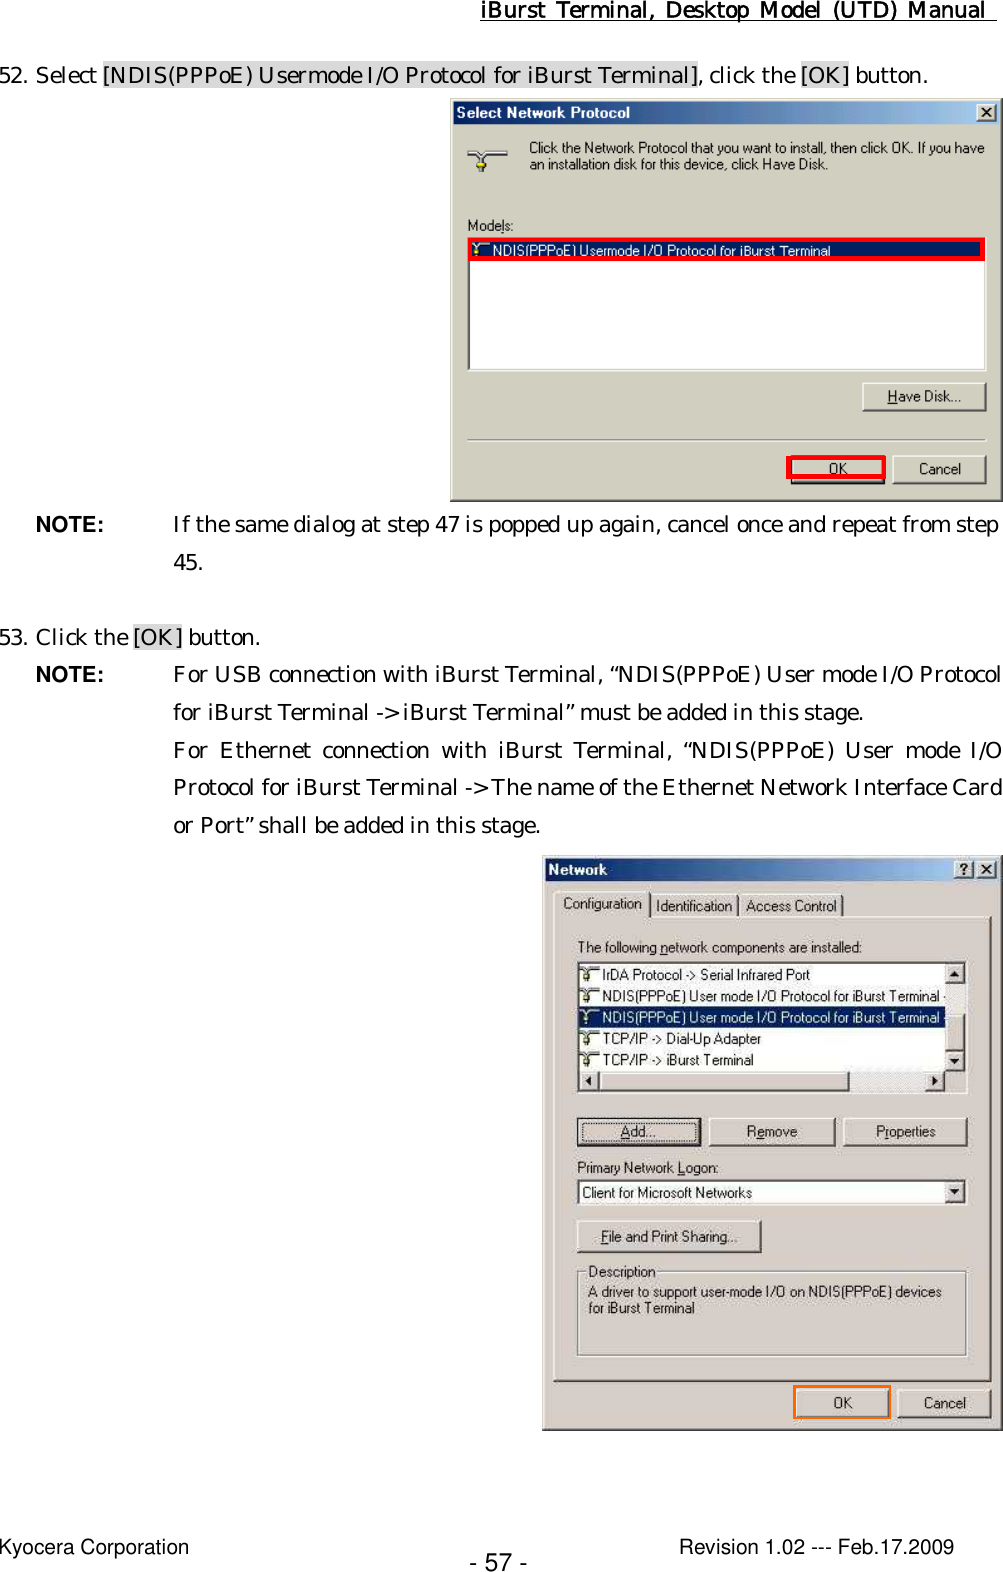 iBurst  Terminal, Desktop  Model  (UTD)  Manual    Kyocera Corporation                                                                                              Revision 1.02 --- Feb.17.2009 - 57 - 52. Select [NDIS(PPPoE) Usermode I/O Protocol for iBurst Terminal], click the [OK] button.  NOTE:  If the same dialog at step 47 is popped up again, cancel once and repeat from step 45.  53. Click the [OK] button. NOTE:  For USB connection with iBurst Terminal, “NDIS(PPPoE) User mode I/O Protocol for iBurst Terminal -&gt; iBurst Terminal” must be added in this stage. For  Ethernet  connection with  iBurst  Terminal, “NDIS(PPPoE)  User  mode I/O Protocol for iBurst Terminal -&gt; The name of the Ethernet Network Interface Card or Port” shall be added in this stage.   